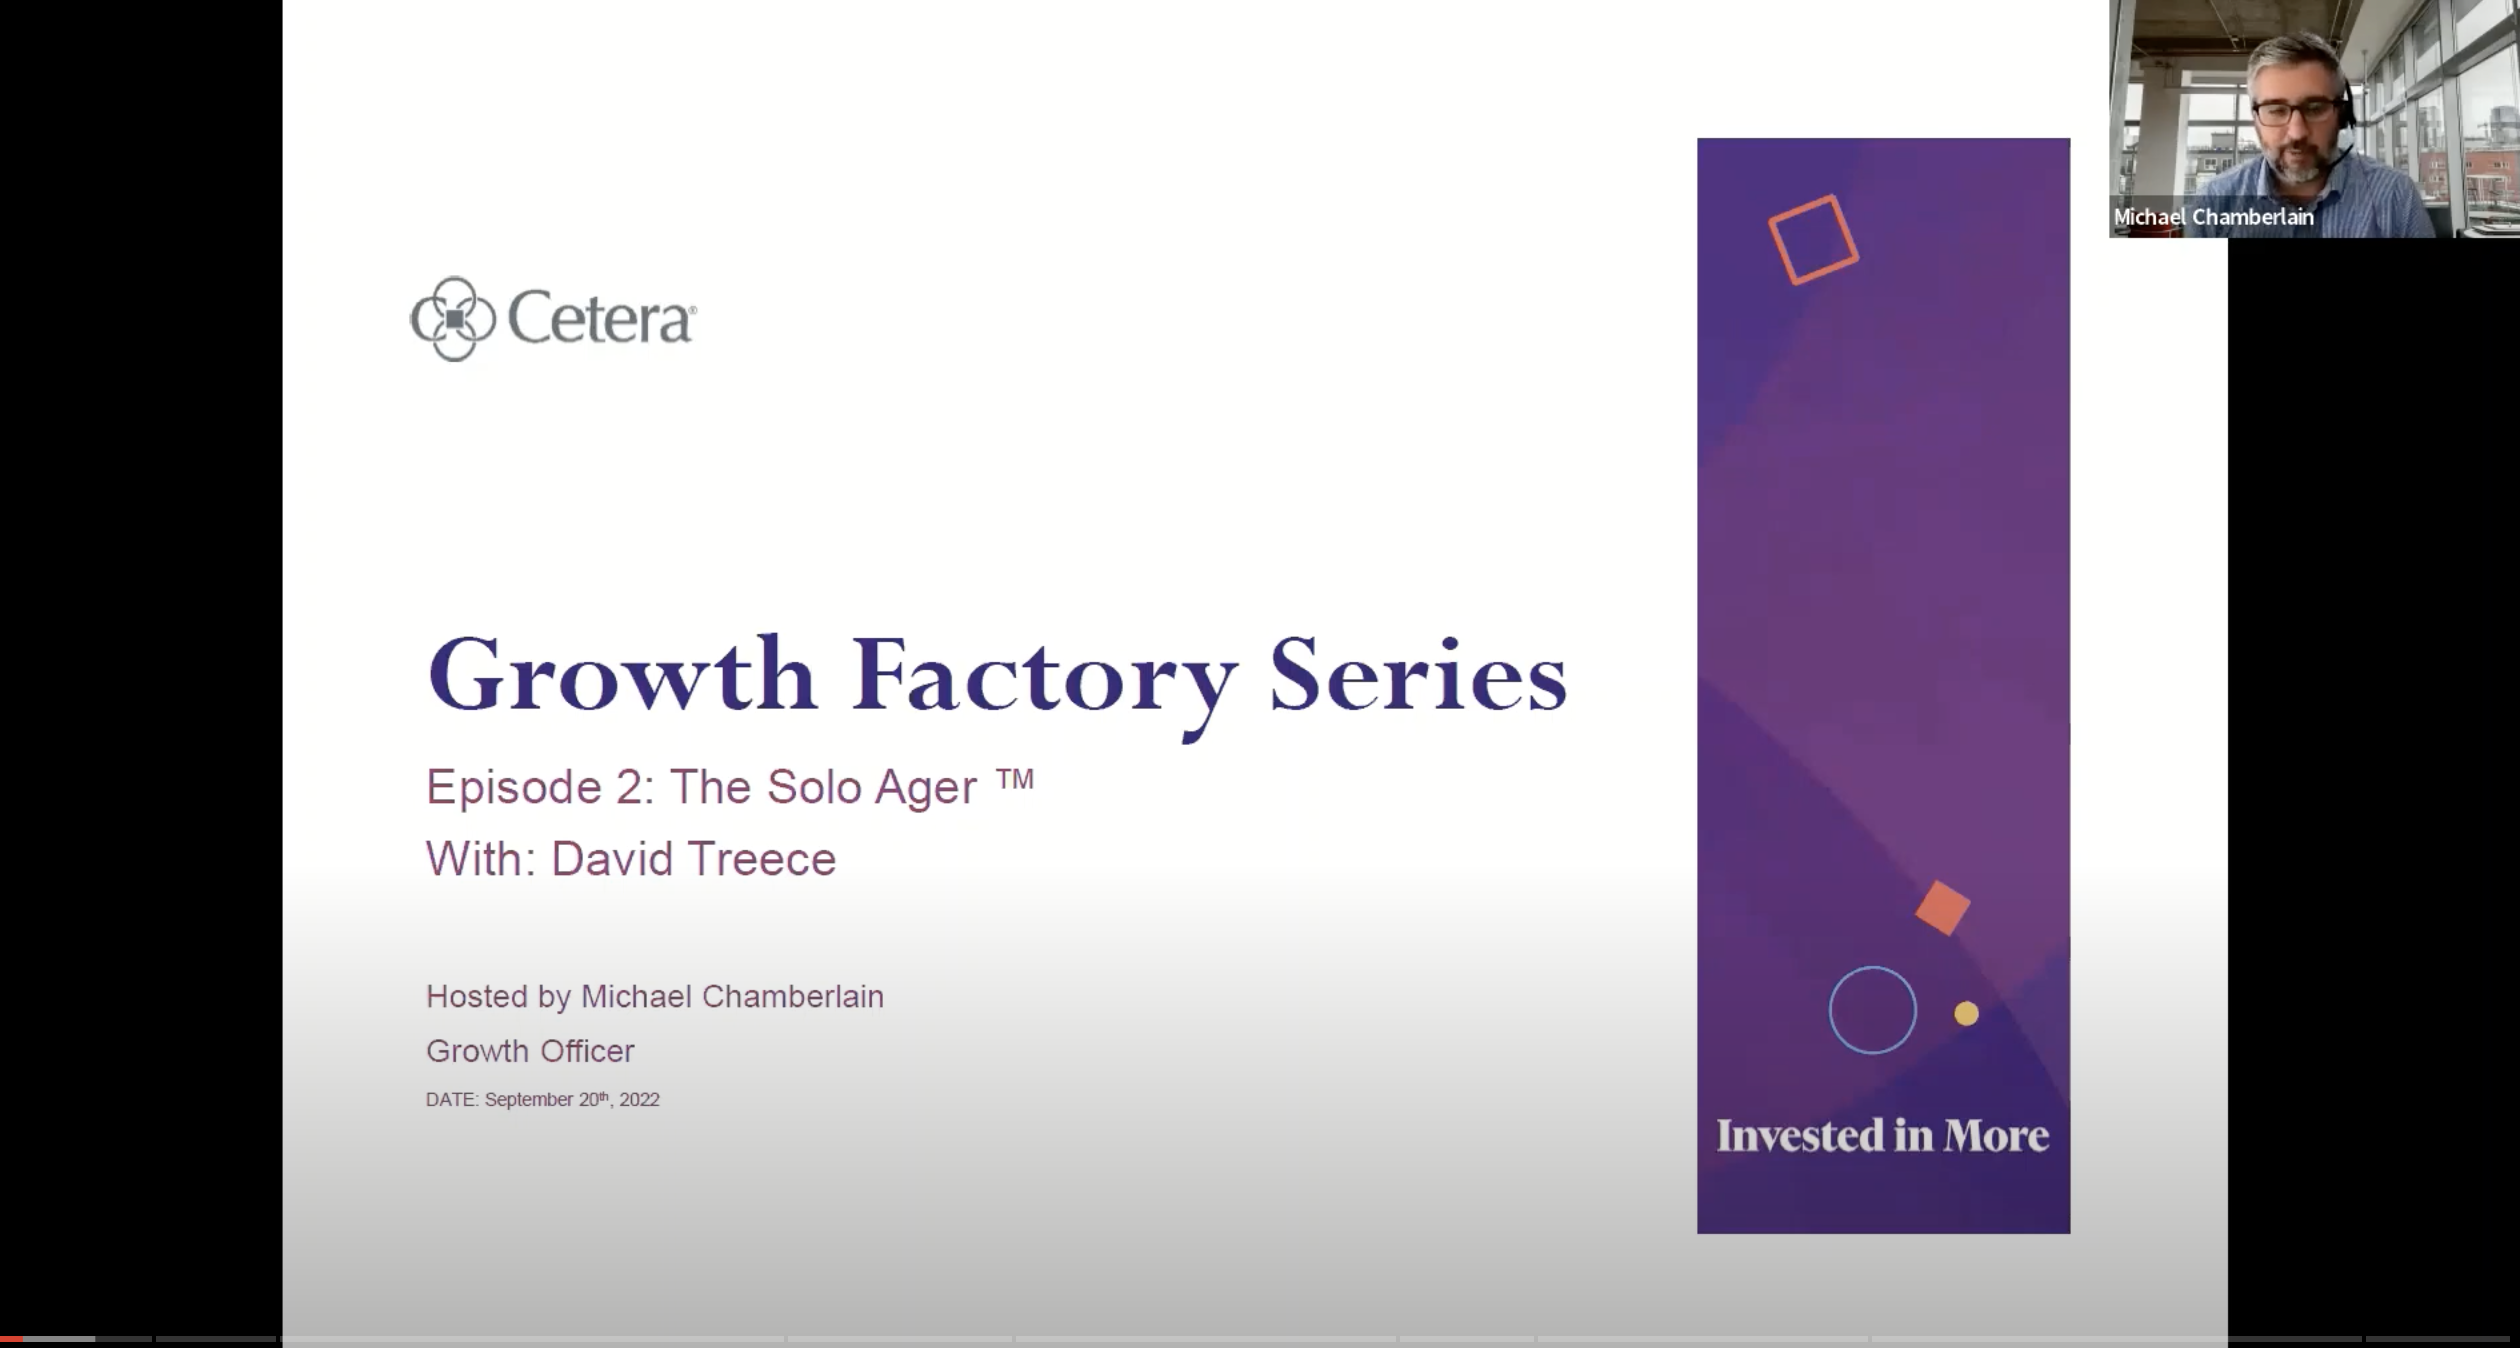 Cetera's The Growth Factory Podcast: The Solo Ager with David Treece and Michael Chamberlain